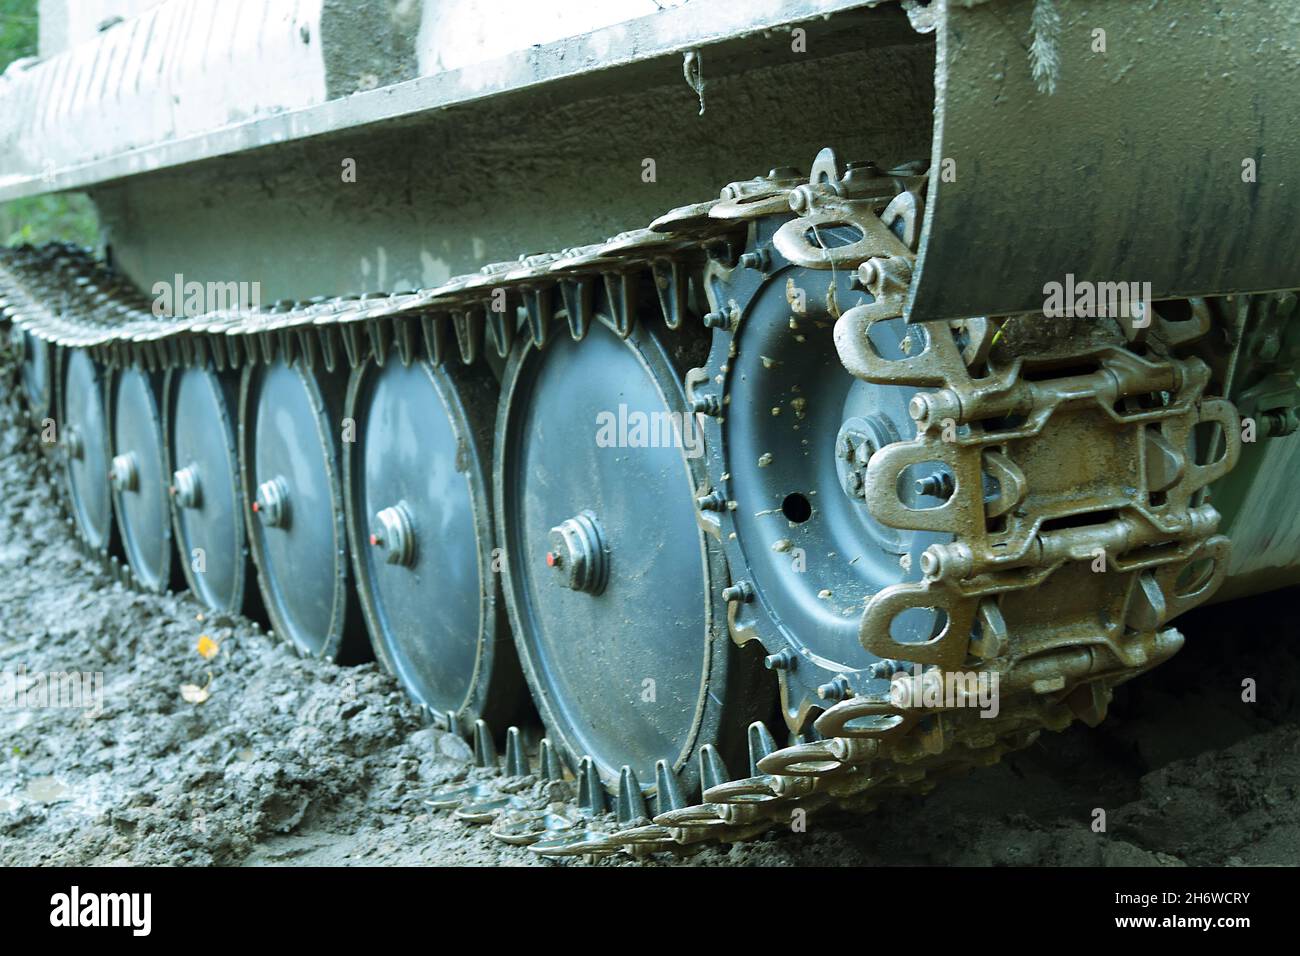 Dirty all-terrain vehicle tracks, caterpillar truck after working in swampy terrain Stock Photo